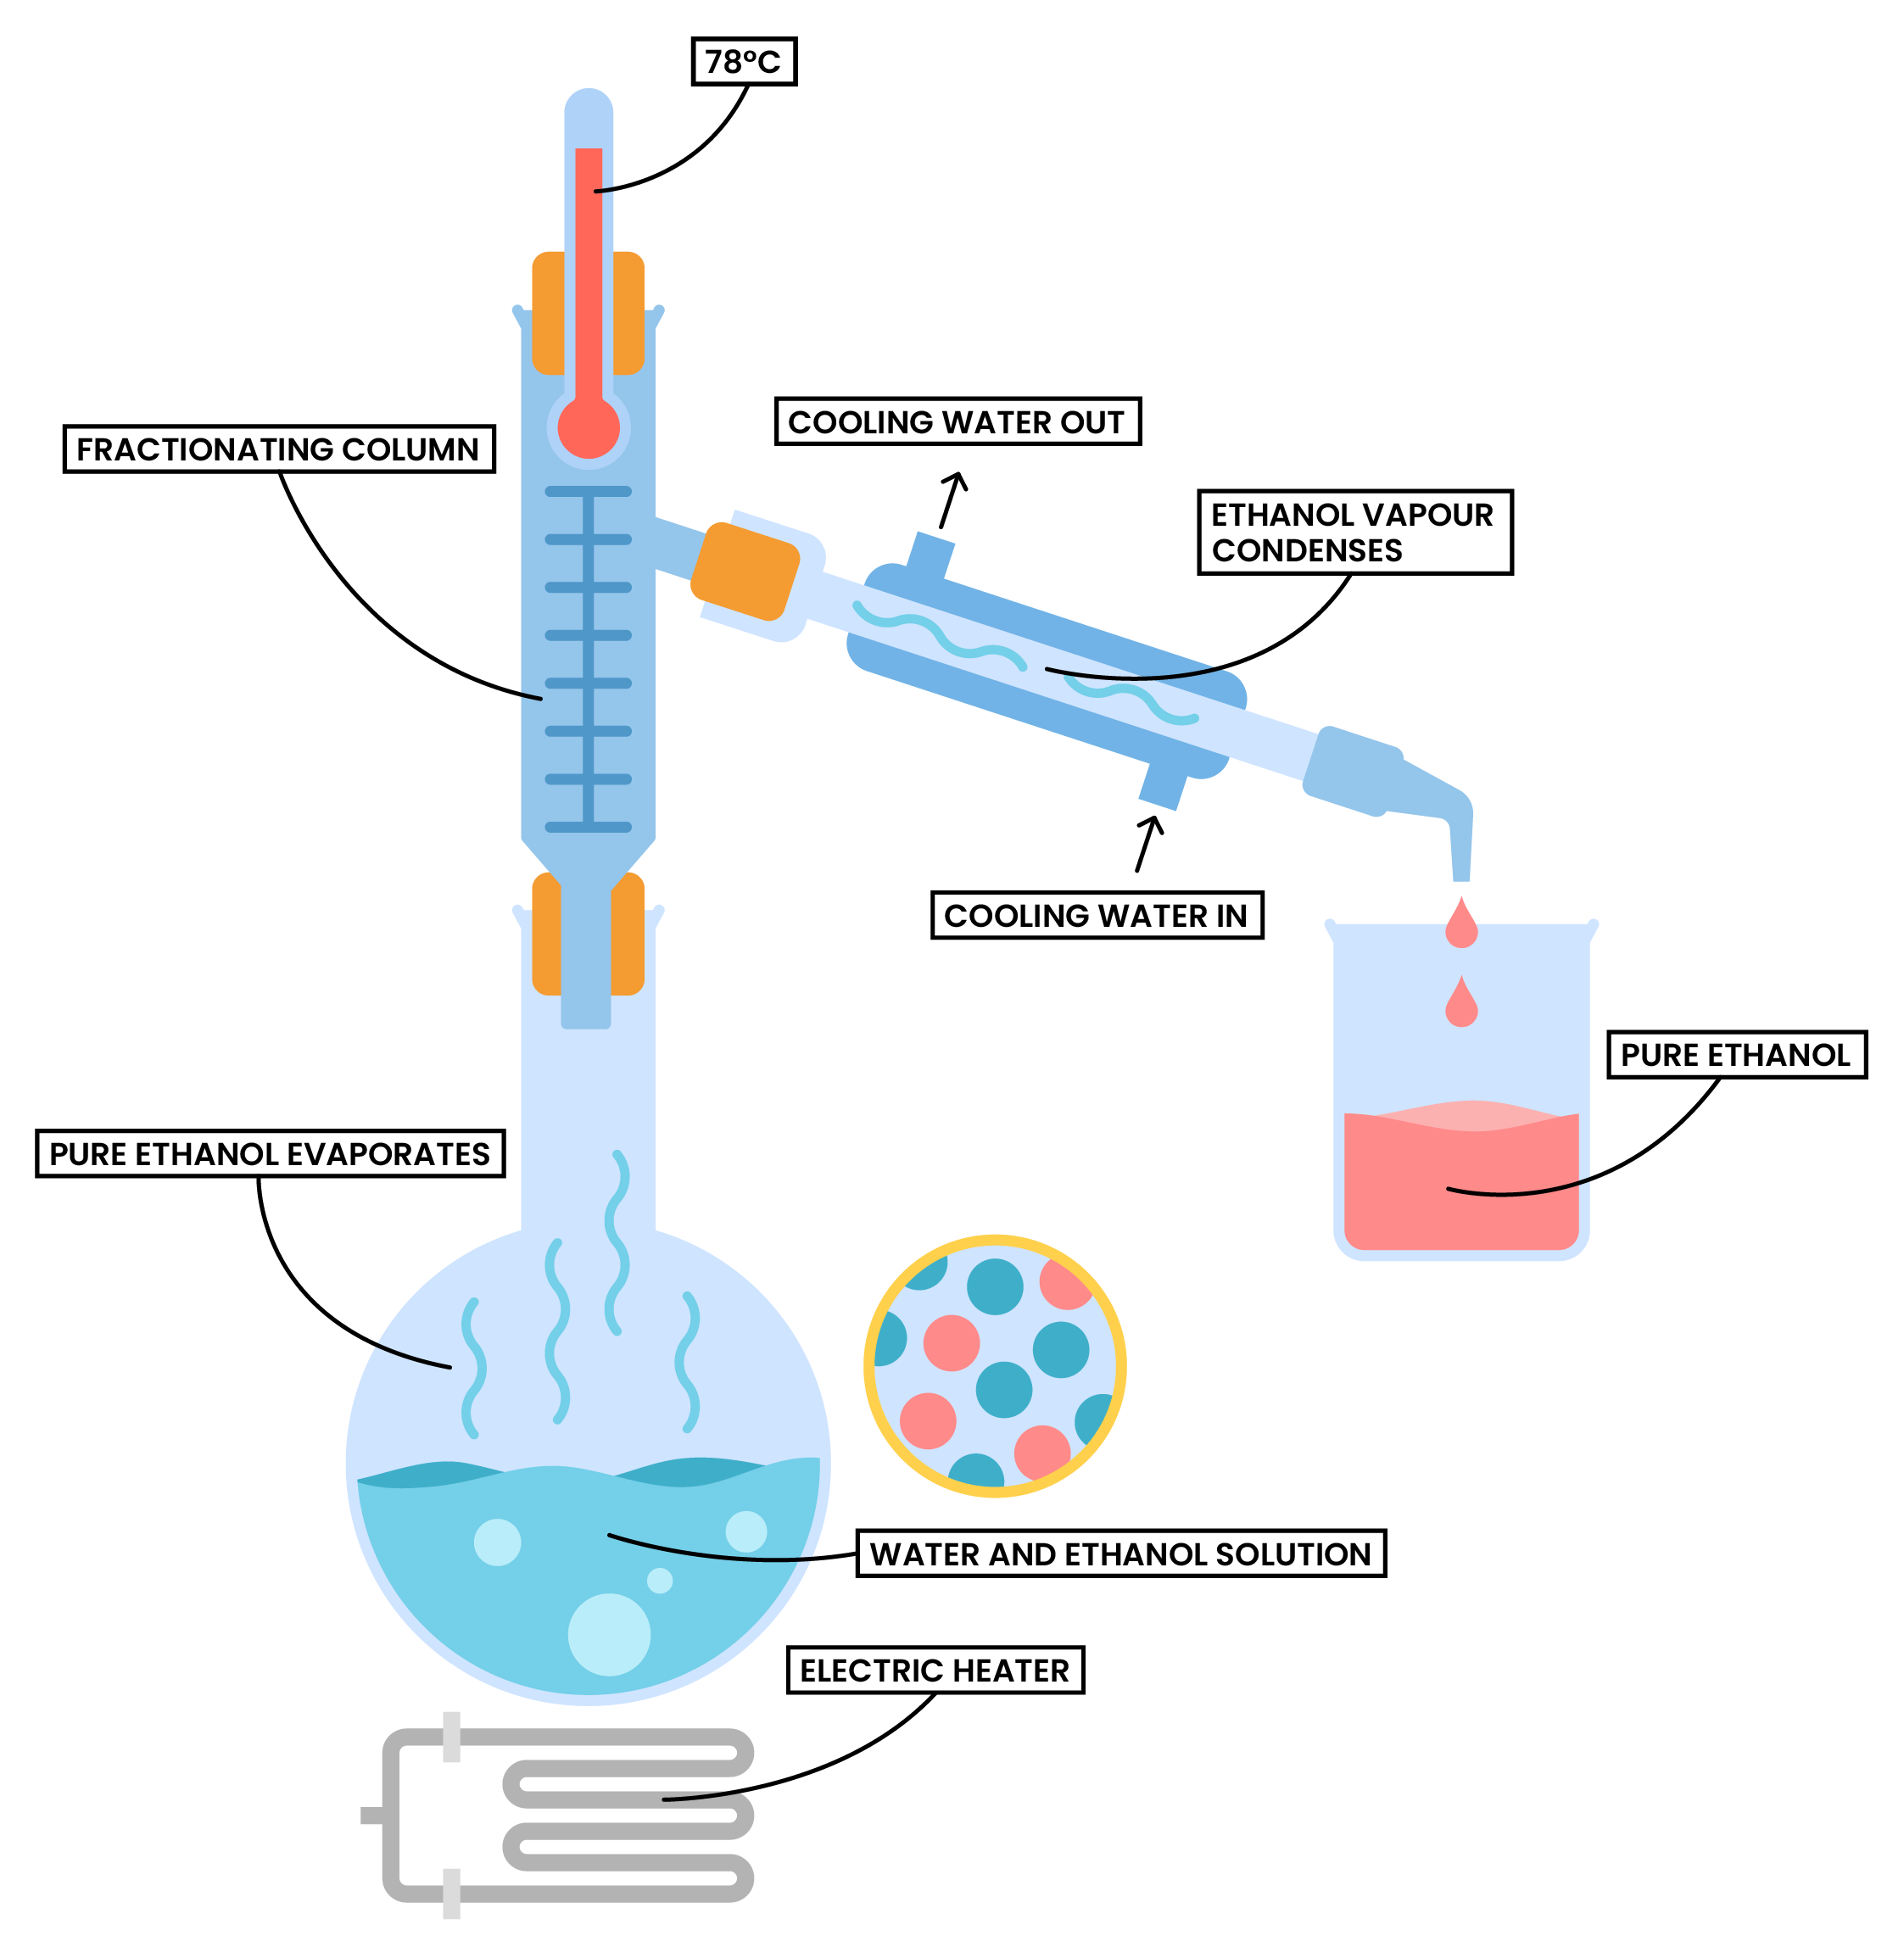 edexcel_igcse_chemistry_topic 02_elements, compounds, and mixtures_005_fractional distillation of ethanol from a solution labelled diagram